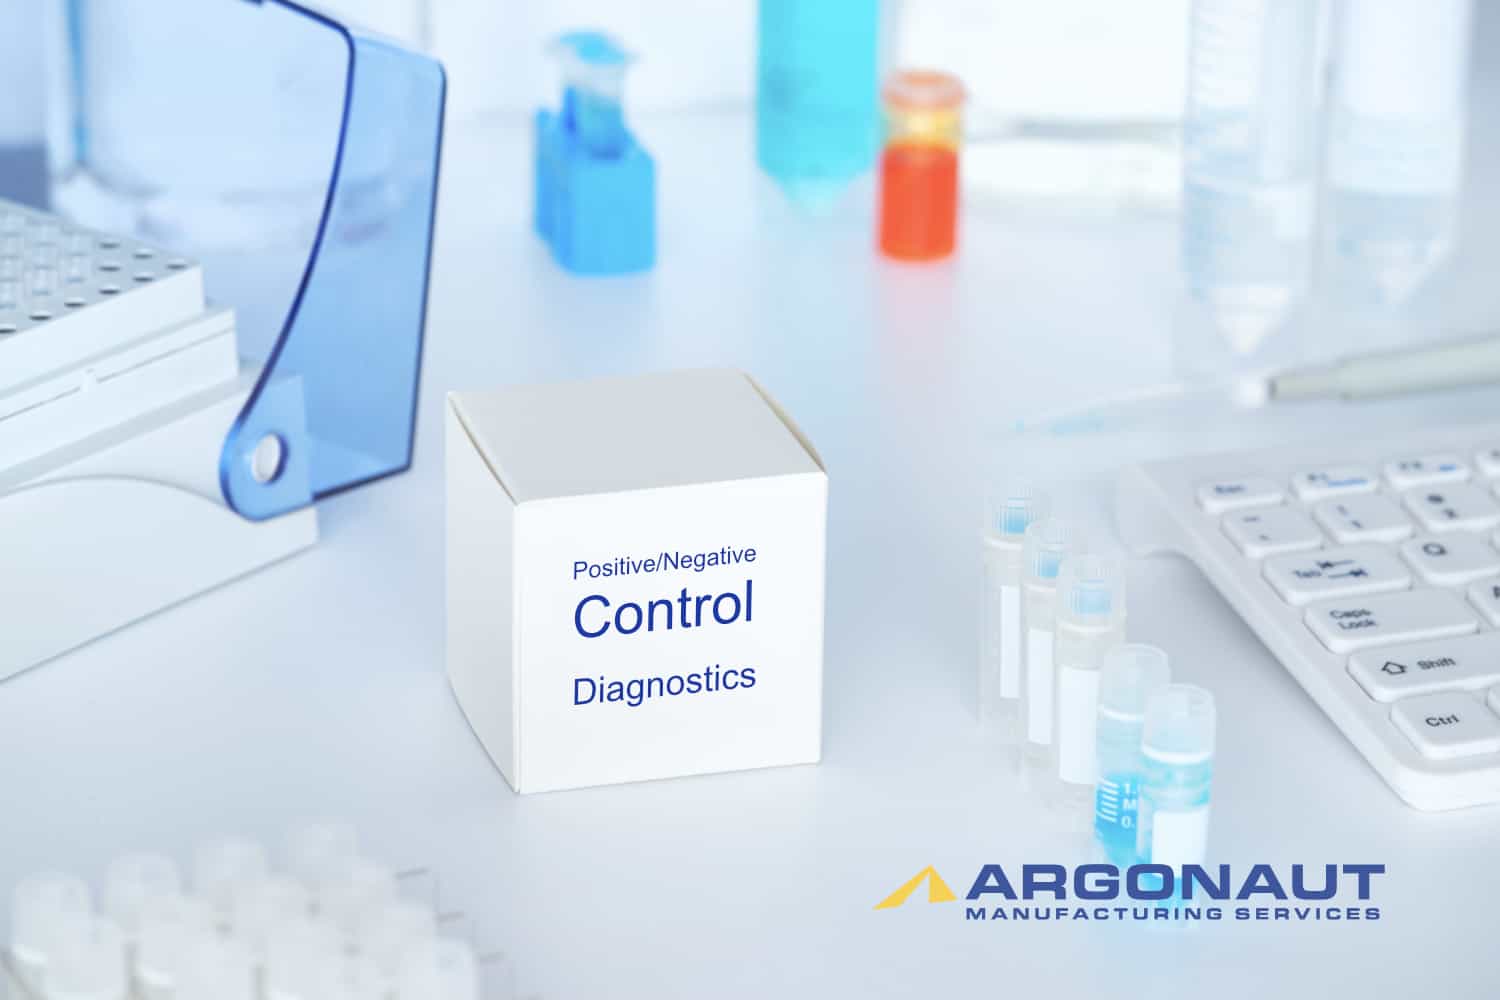 3 Challenges in Manufacturing Controls for Your Molecular Diagnostic Assay